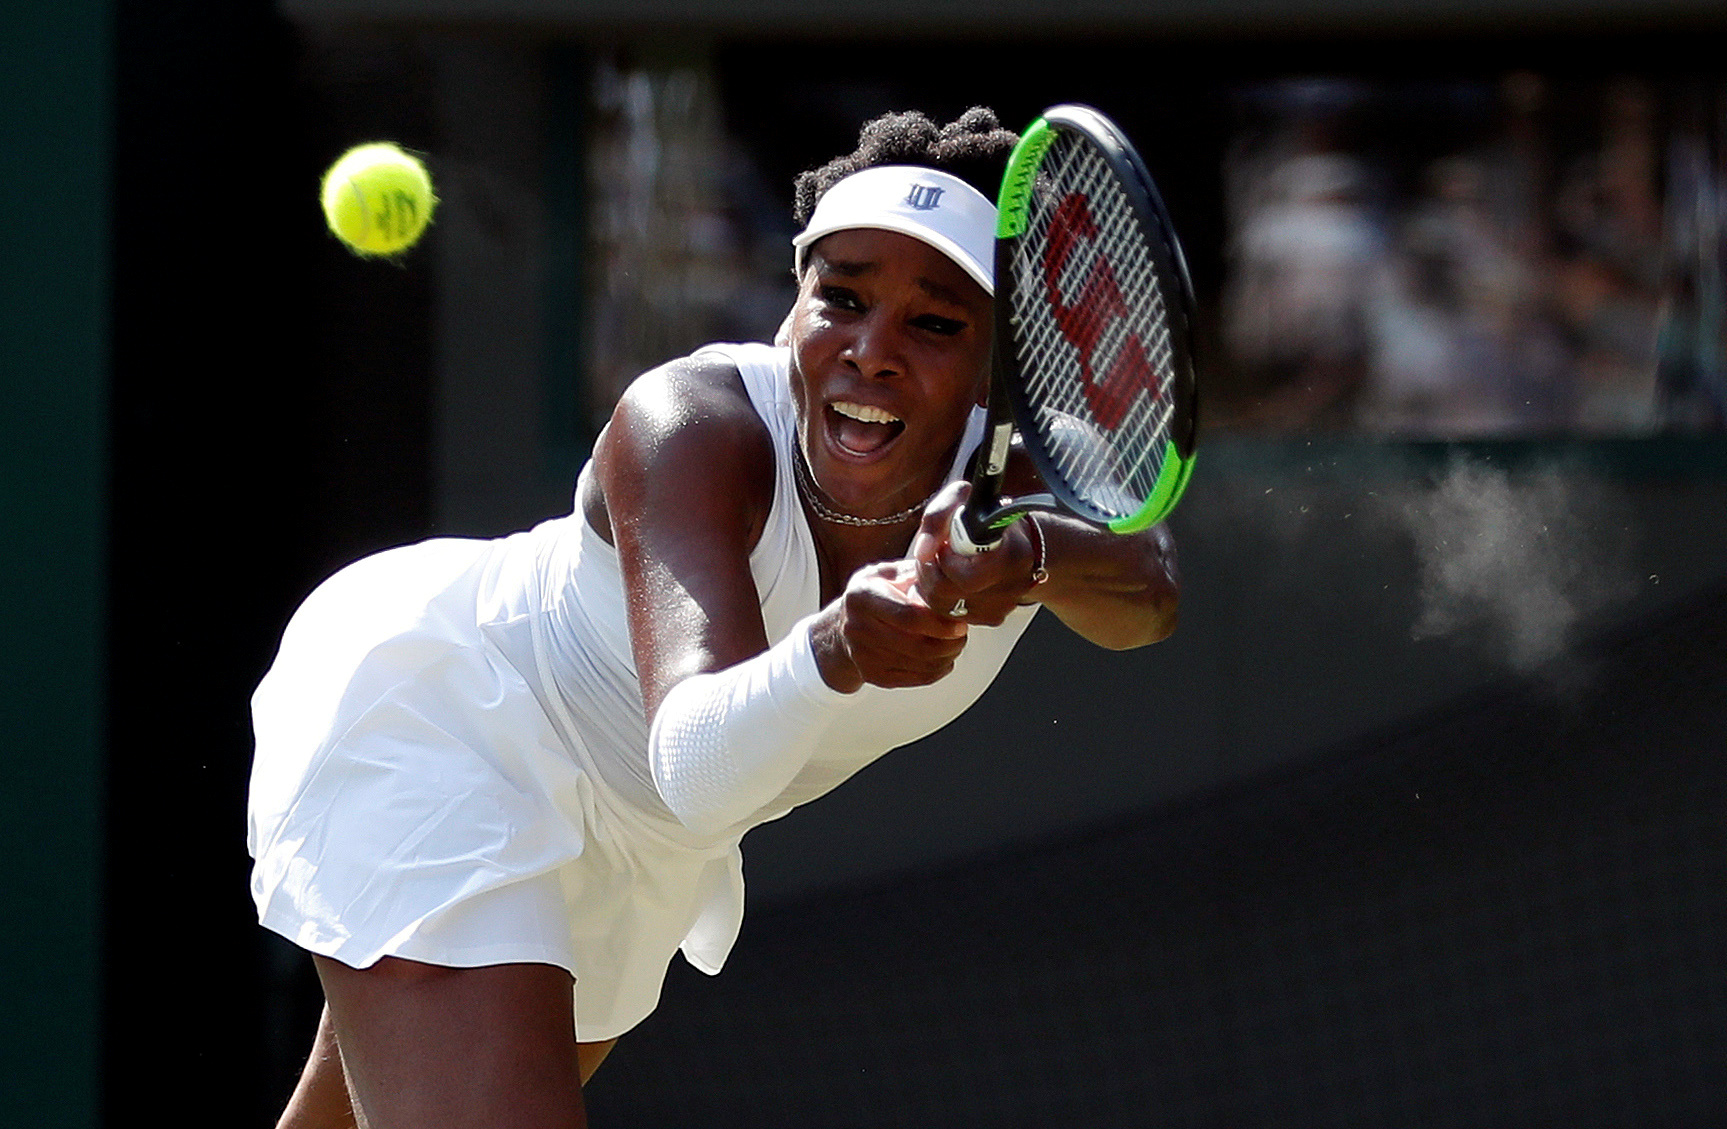 
Implicit bias was likely behind The Wall Street Journal’s now-deleted tweet “Something’s not white! At Wimbledon, a player failed his pre-match undergarment check,” which—accompanied by a photo of Venus Williams (shown here during a third round match against Kiki Bertens of the Netherlands)—linked to an article about the tennis tournament’s all-white garments policy